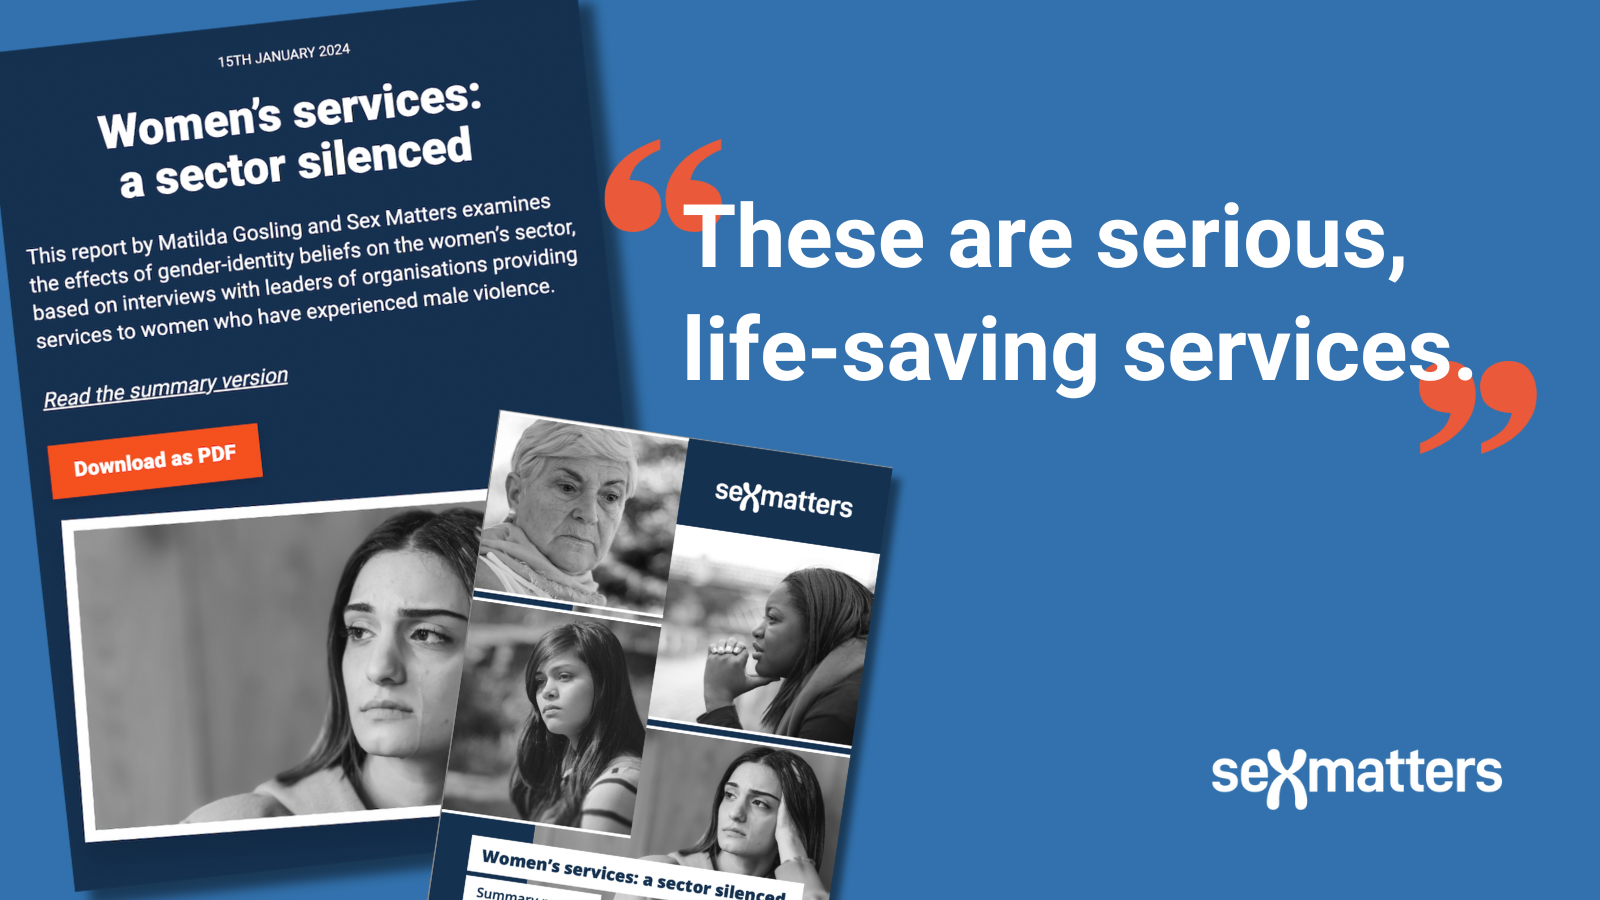 These are serious, life-saving services.